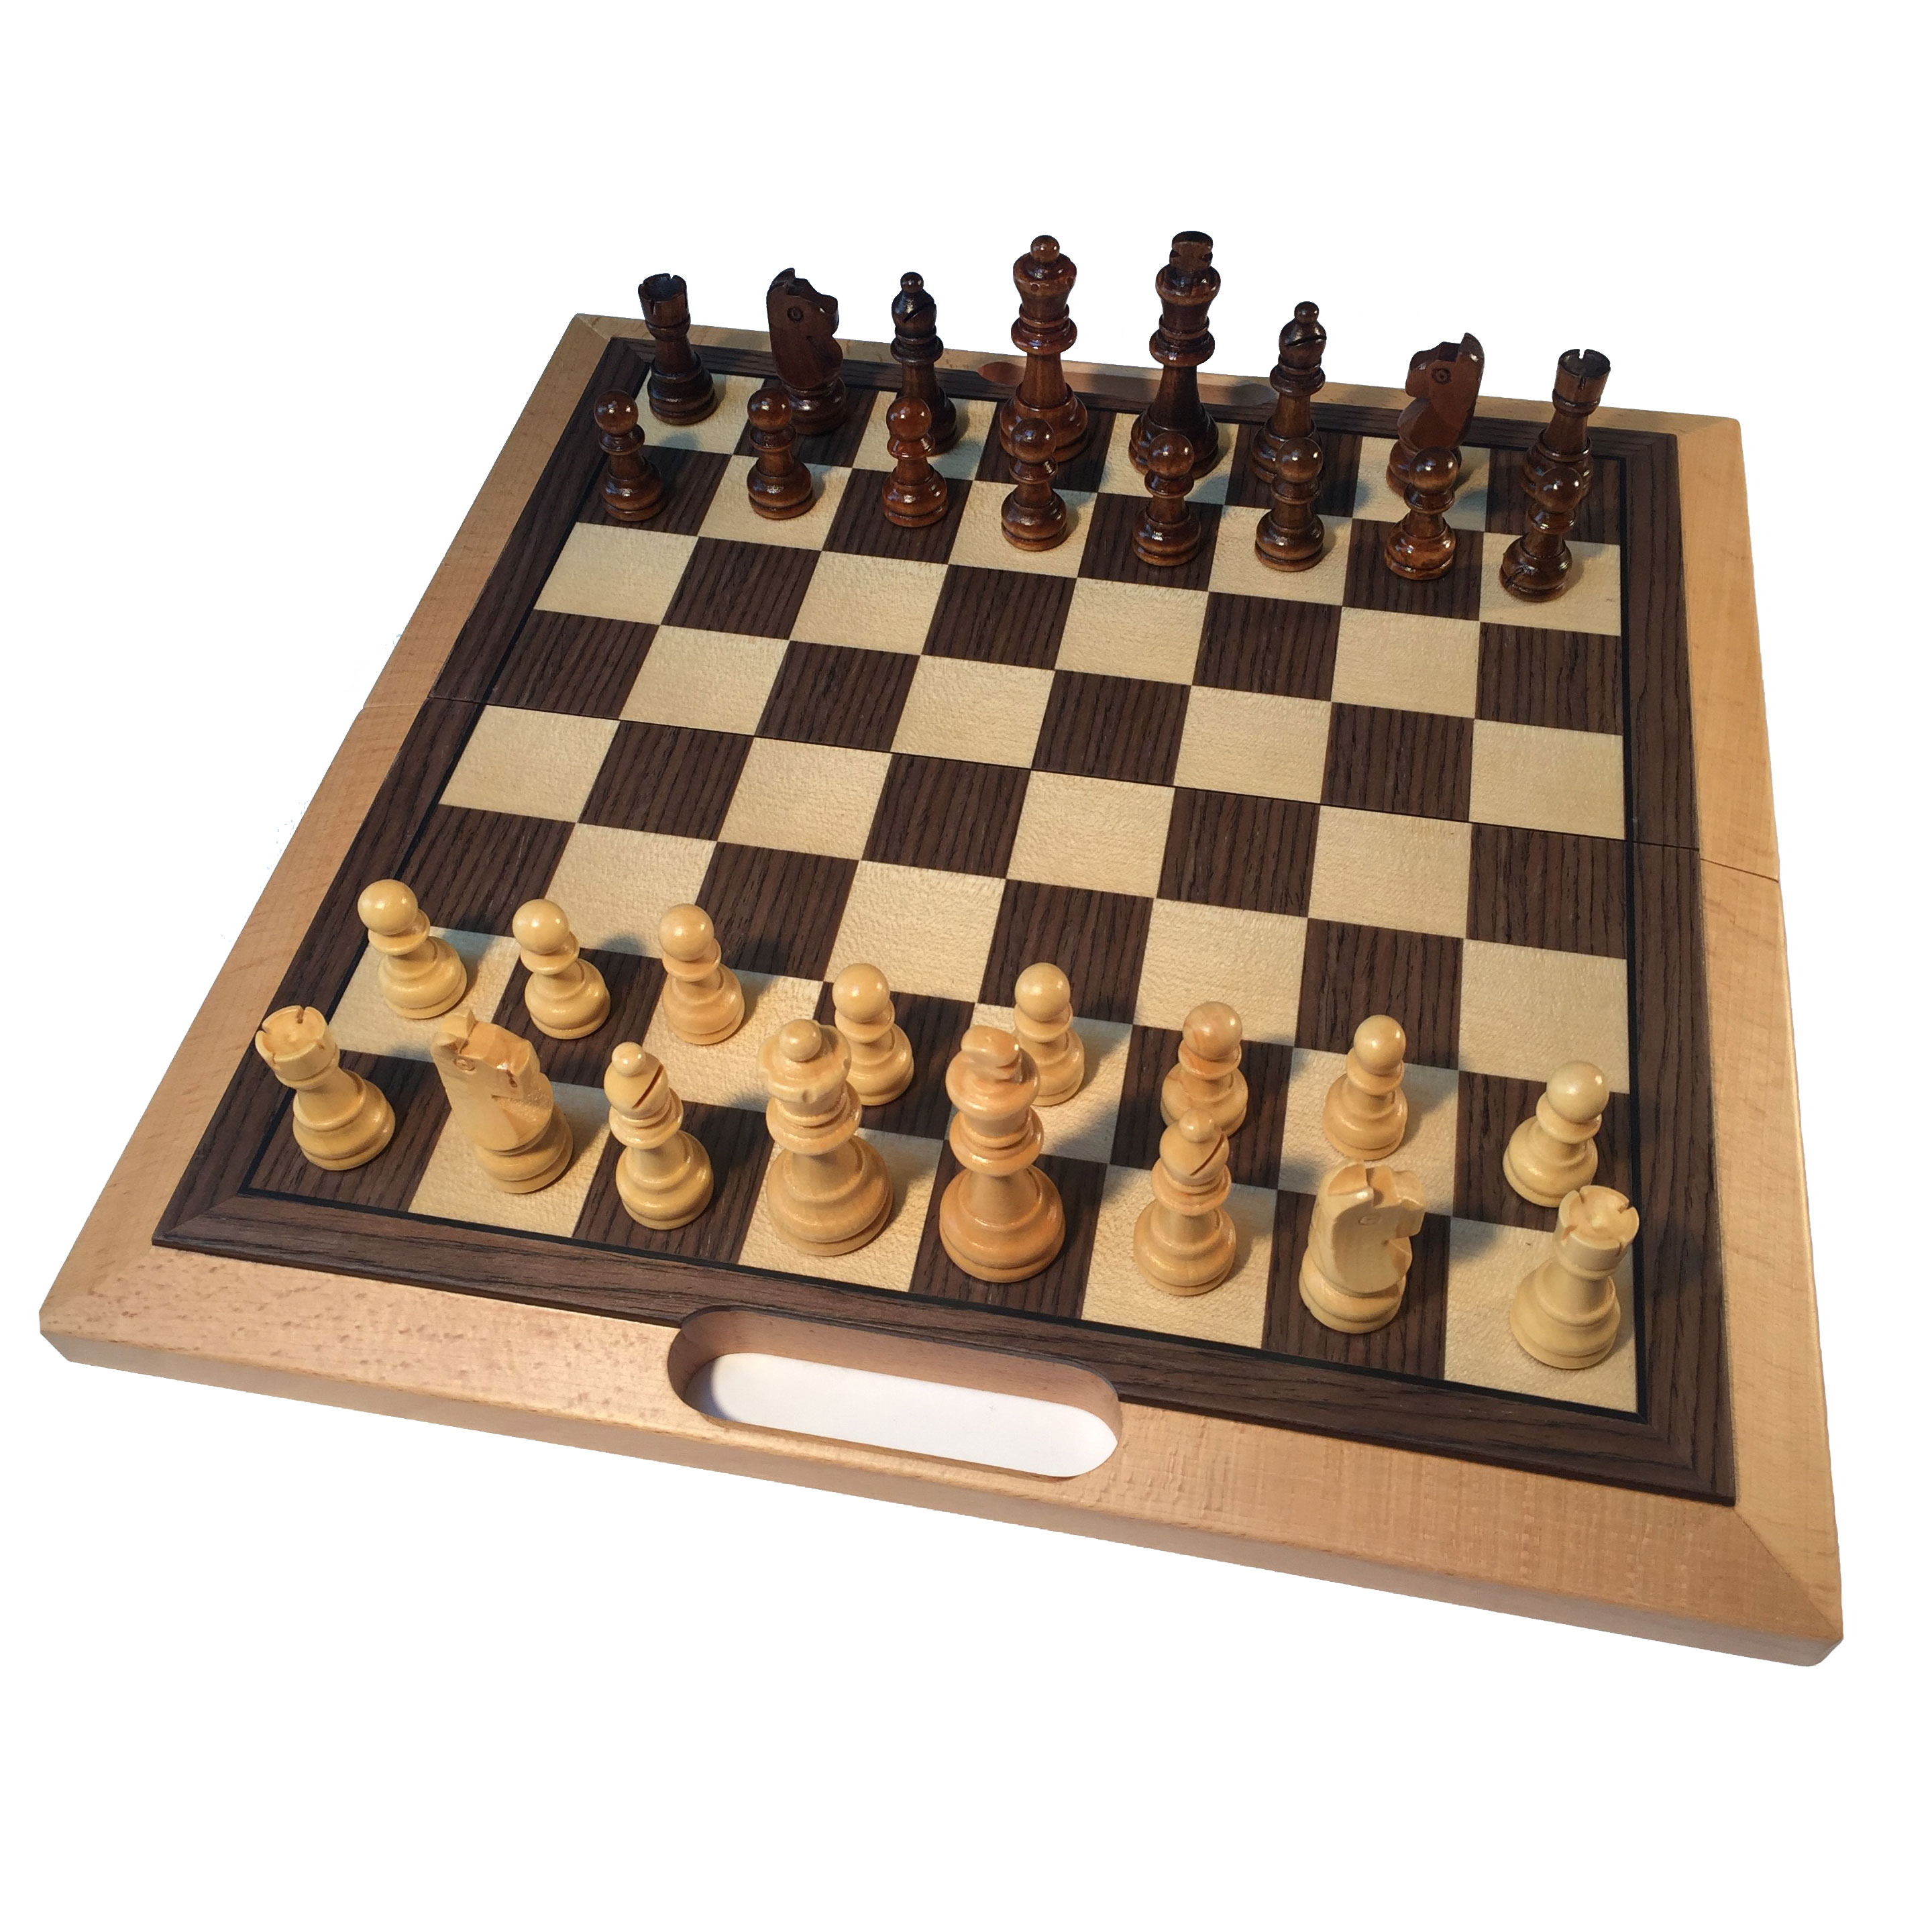 UK Large Chess Wooden Set Folding Chessboard Piece Wood Board Game Multichoice 